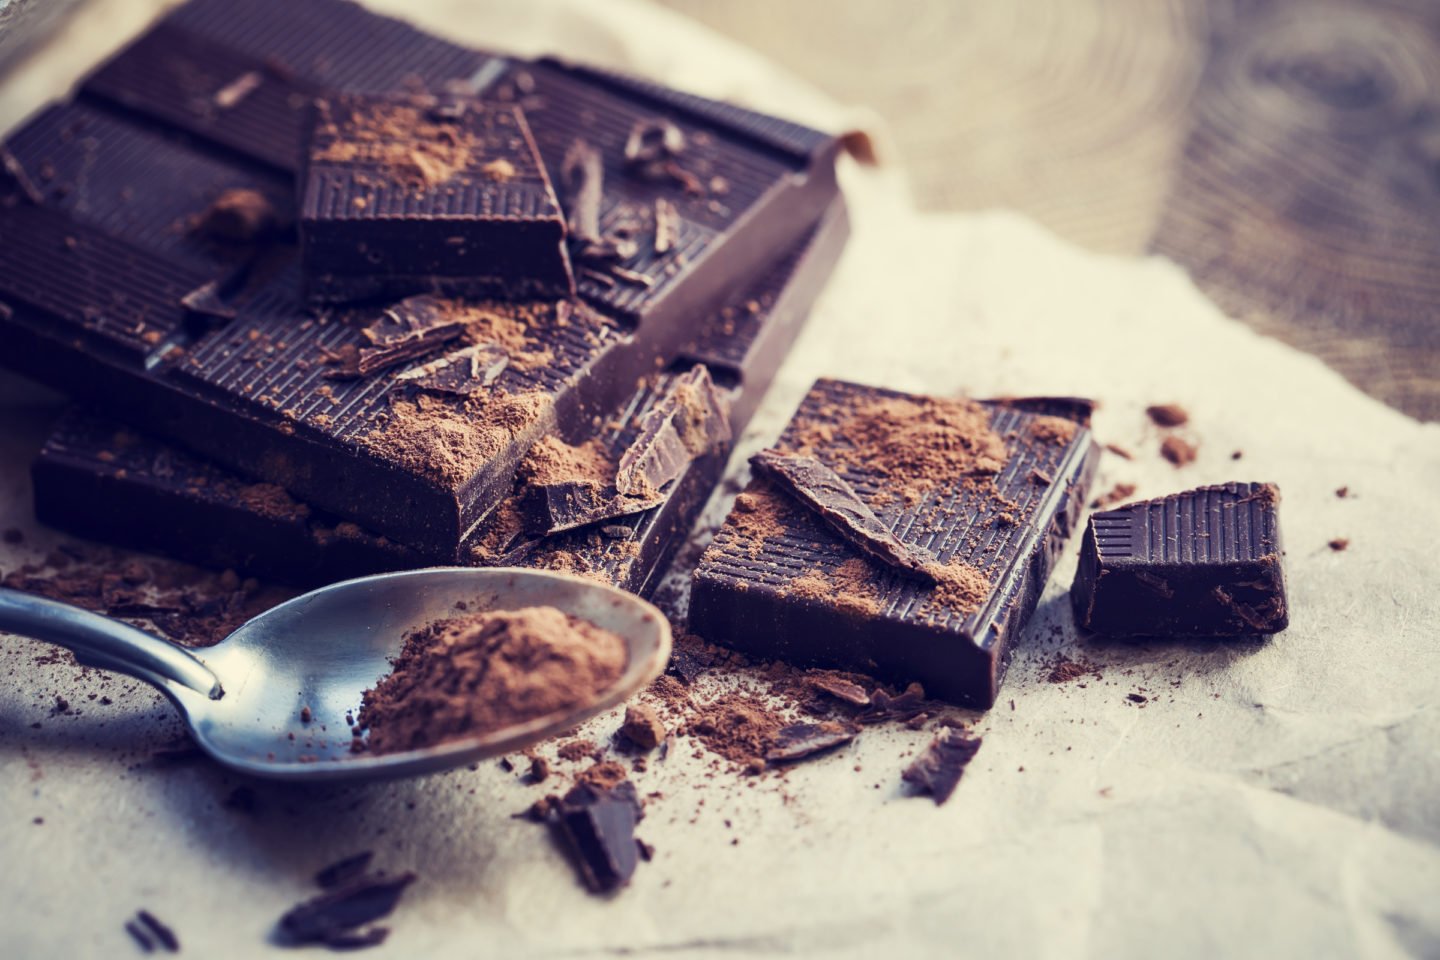 dark chocolate powder or grated as cocoa powder substitute